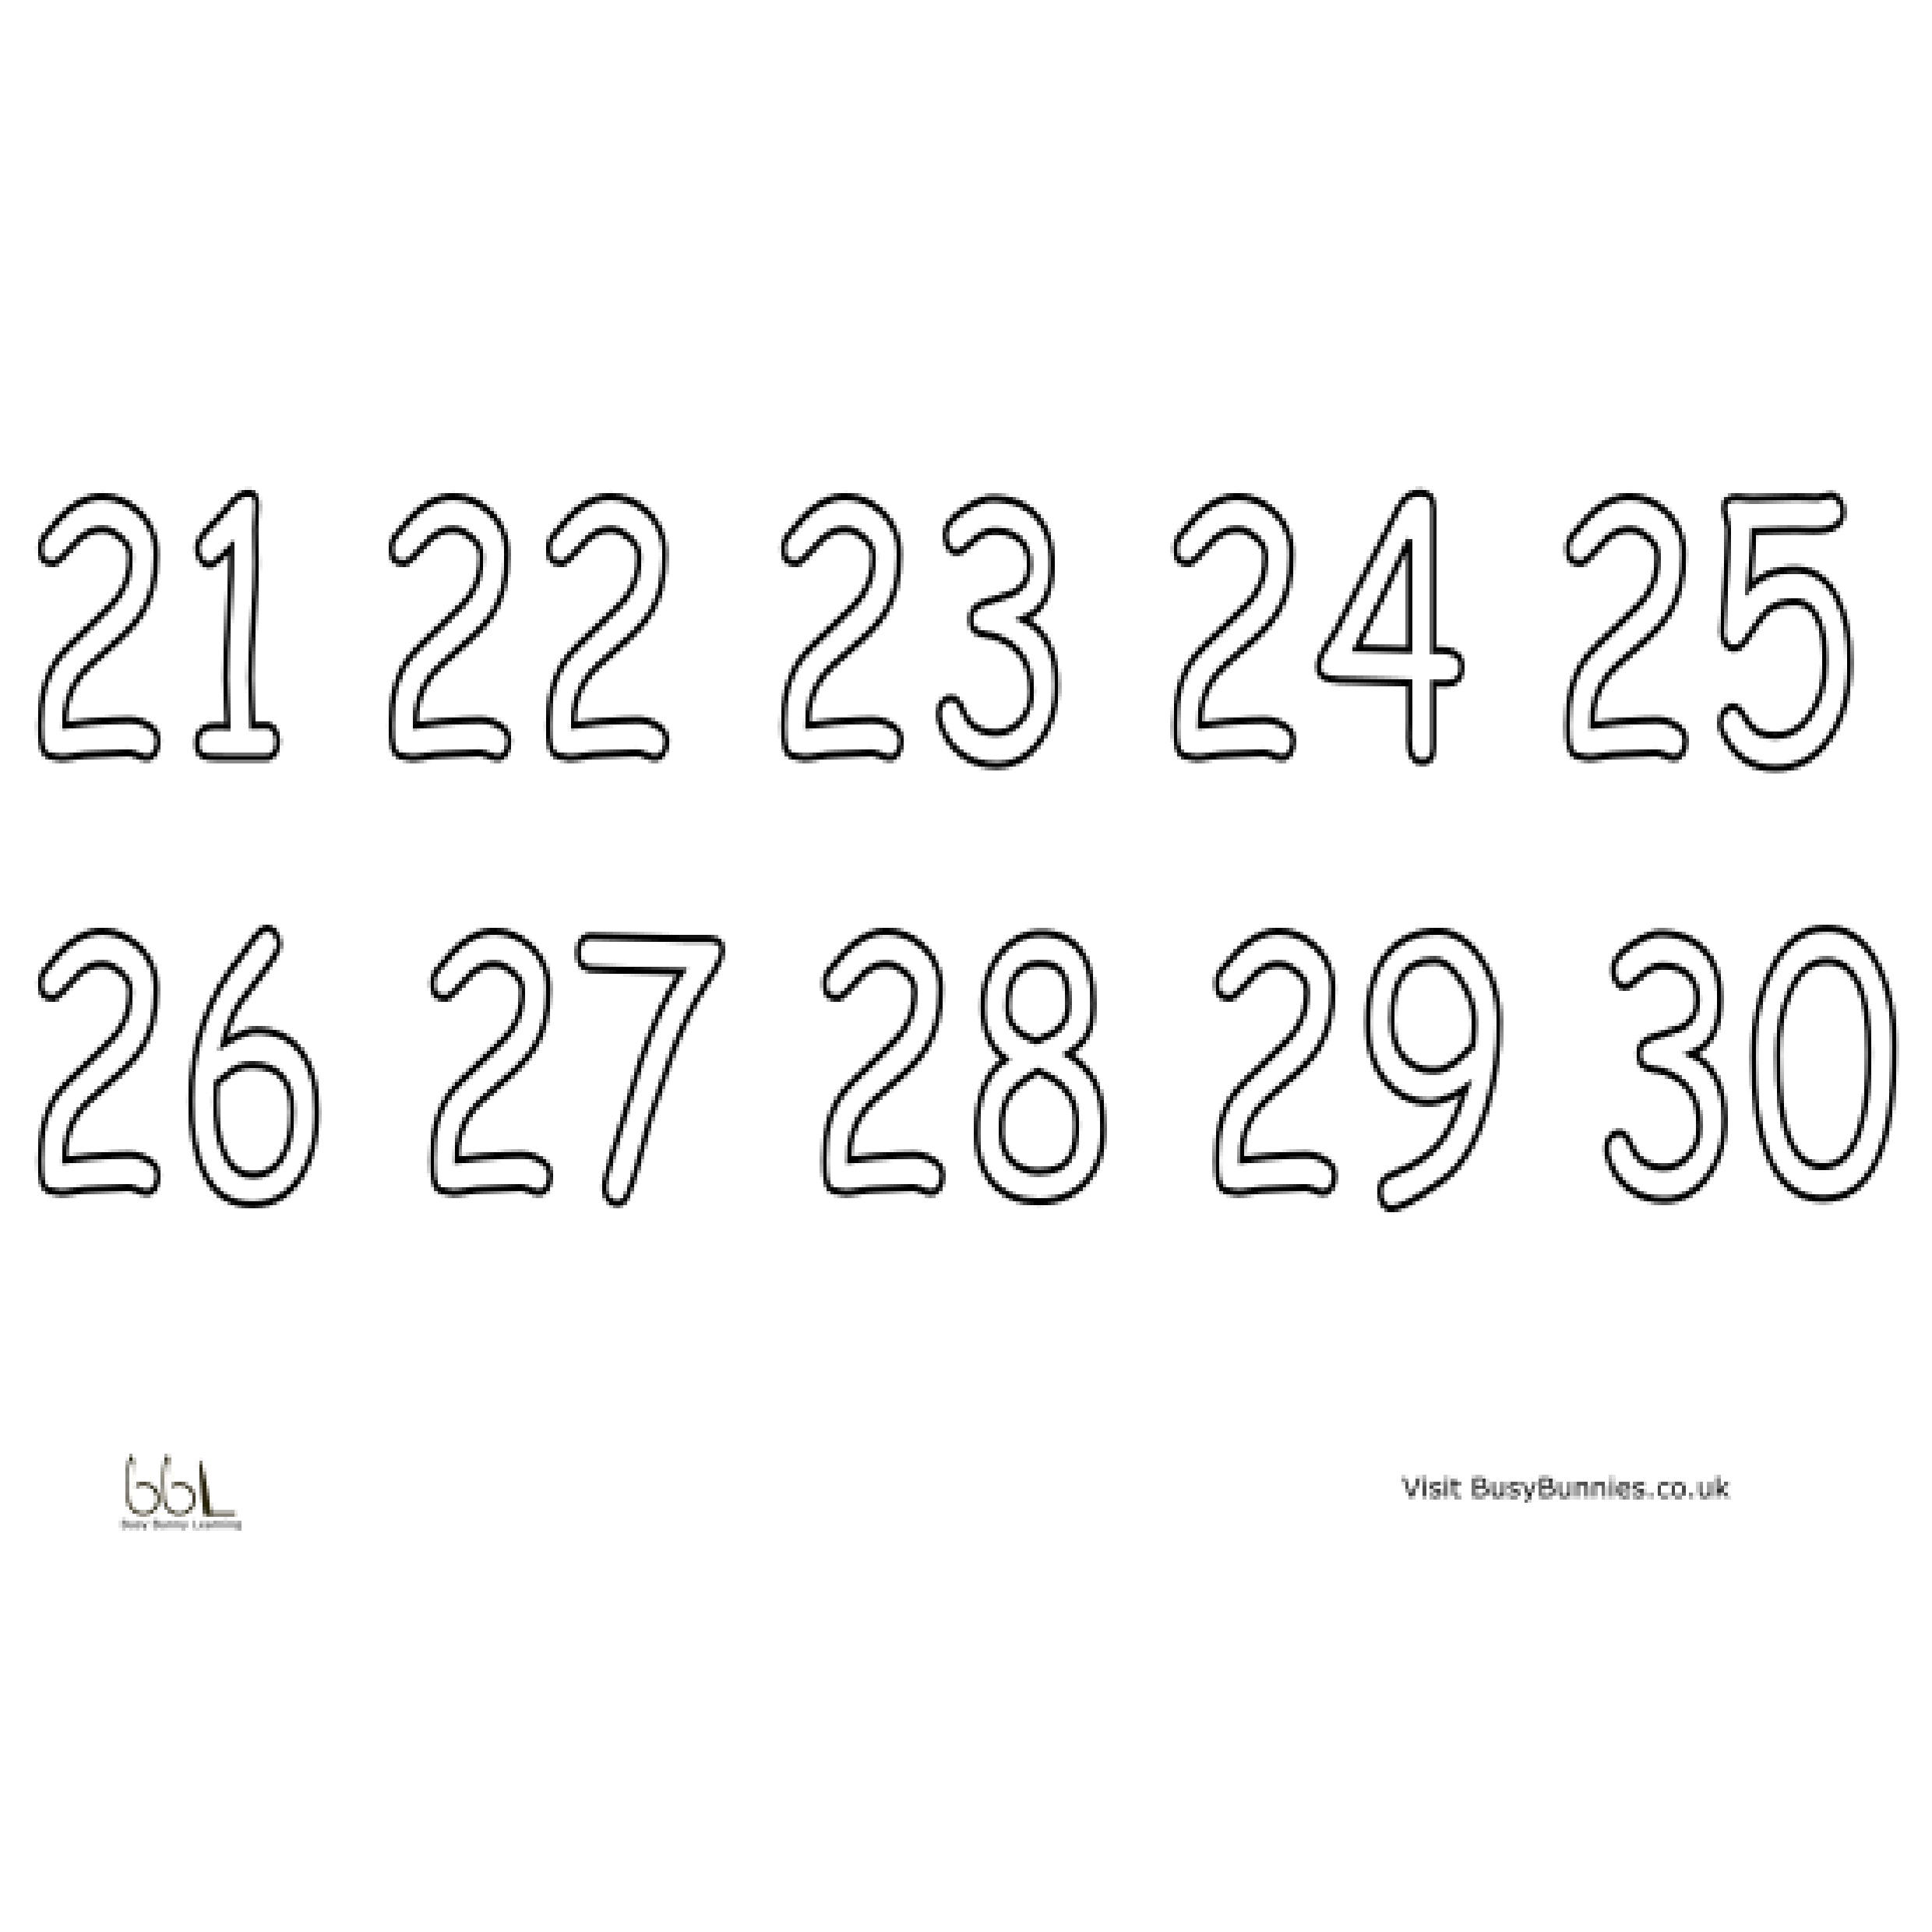 counting-numbers-21-30-kindergarten-counting-a-wellspring-10-printable-numbers-21-30-tracing